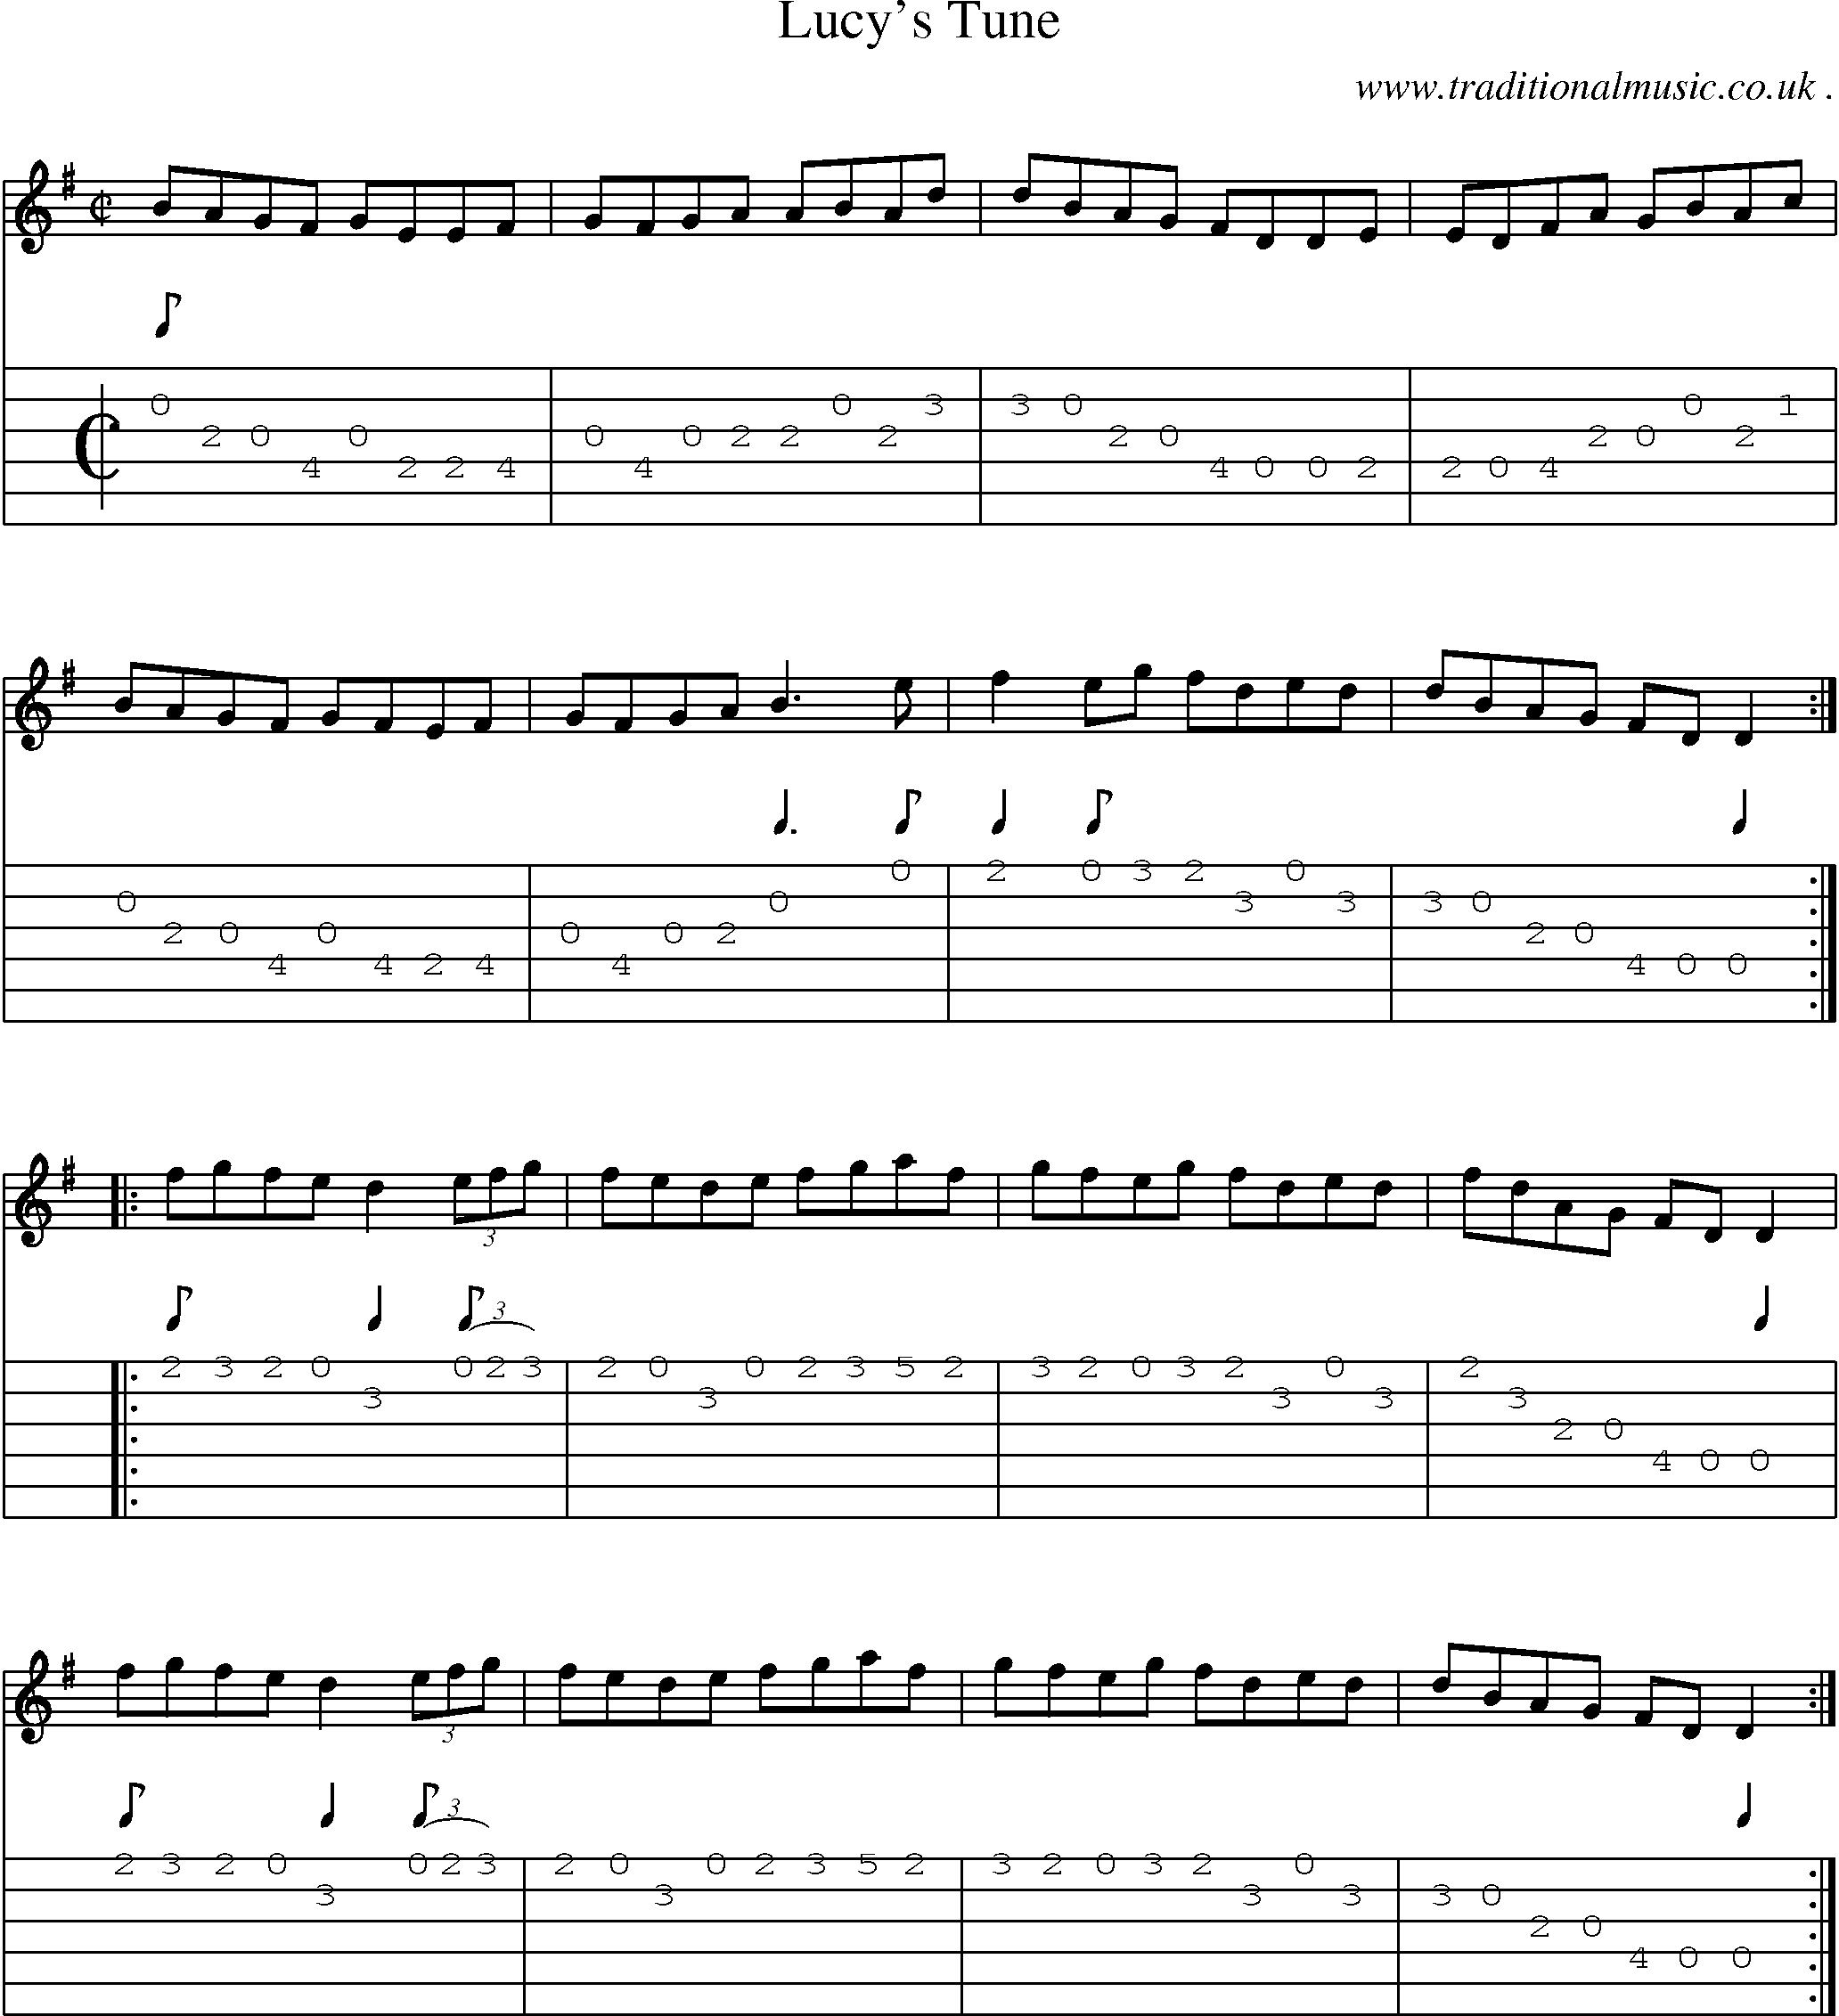 Sheet-Music and Guitar Tabs for Lucys Tune